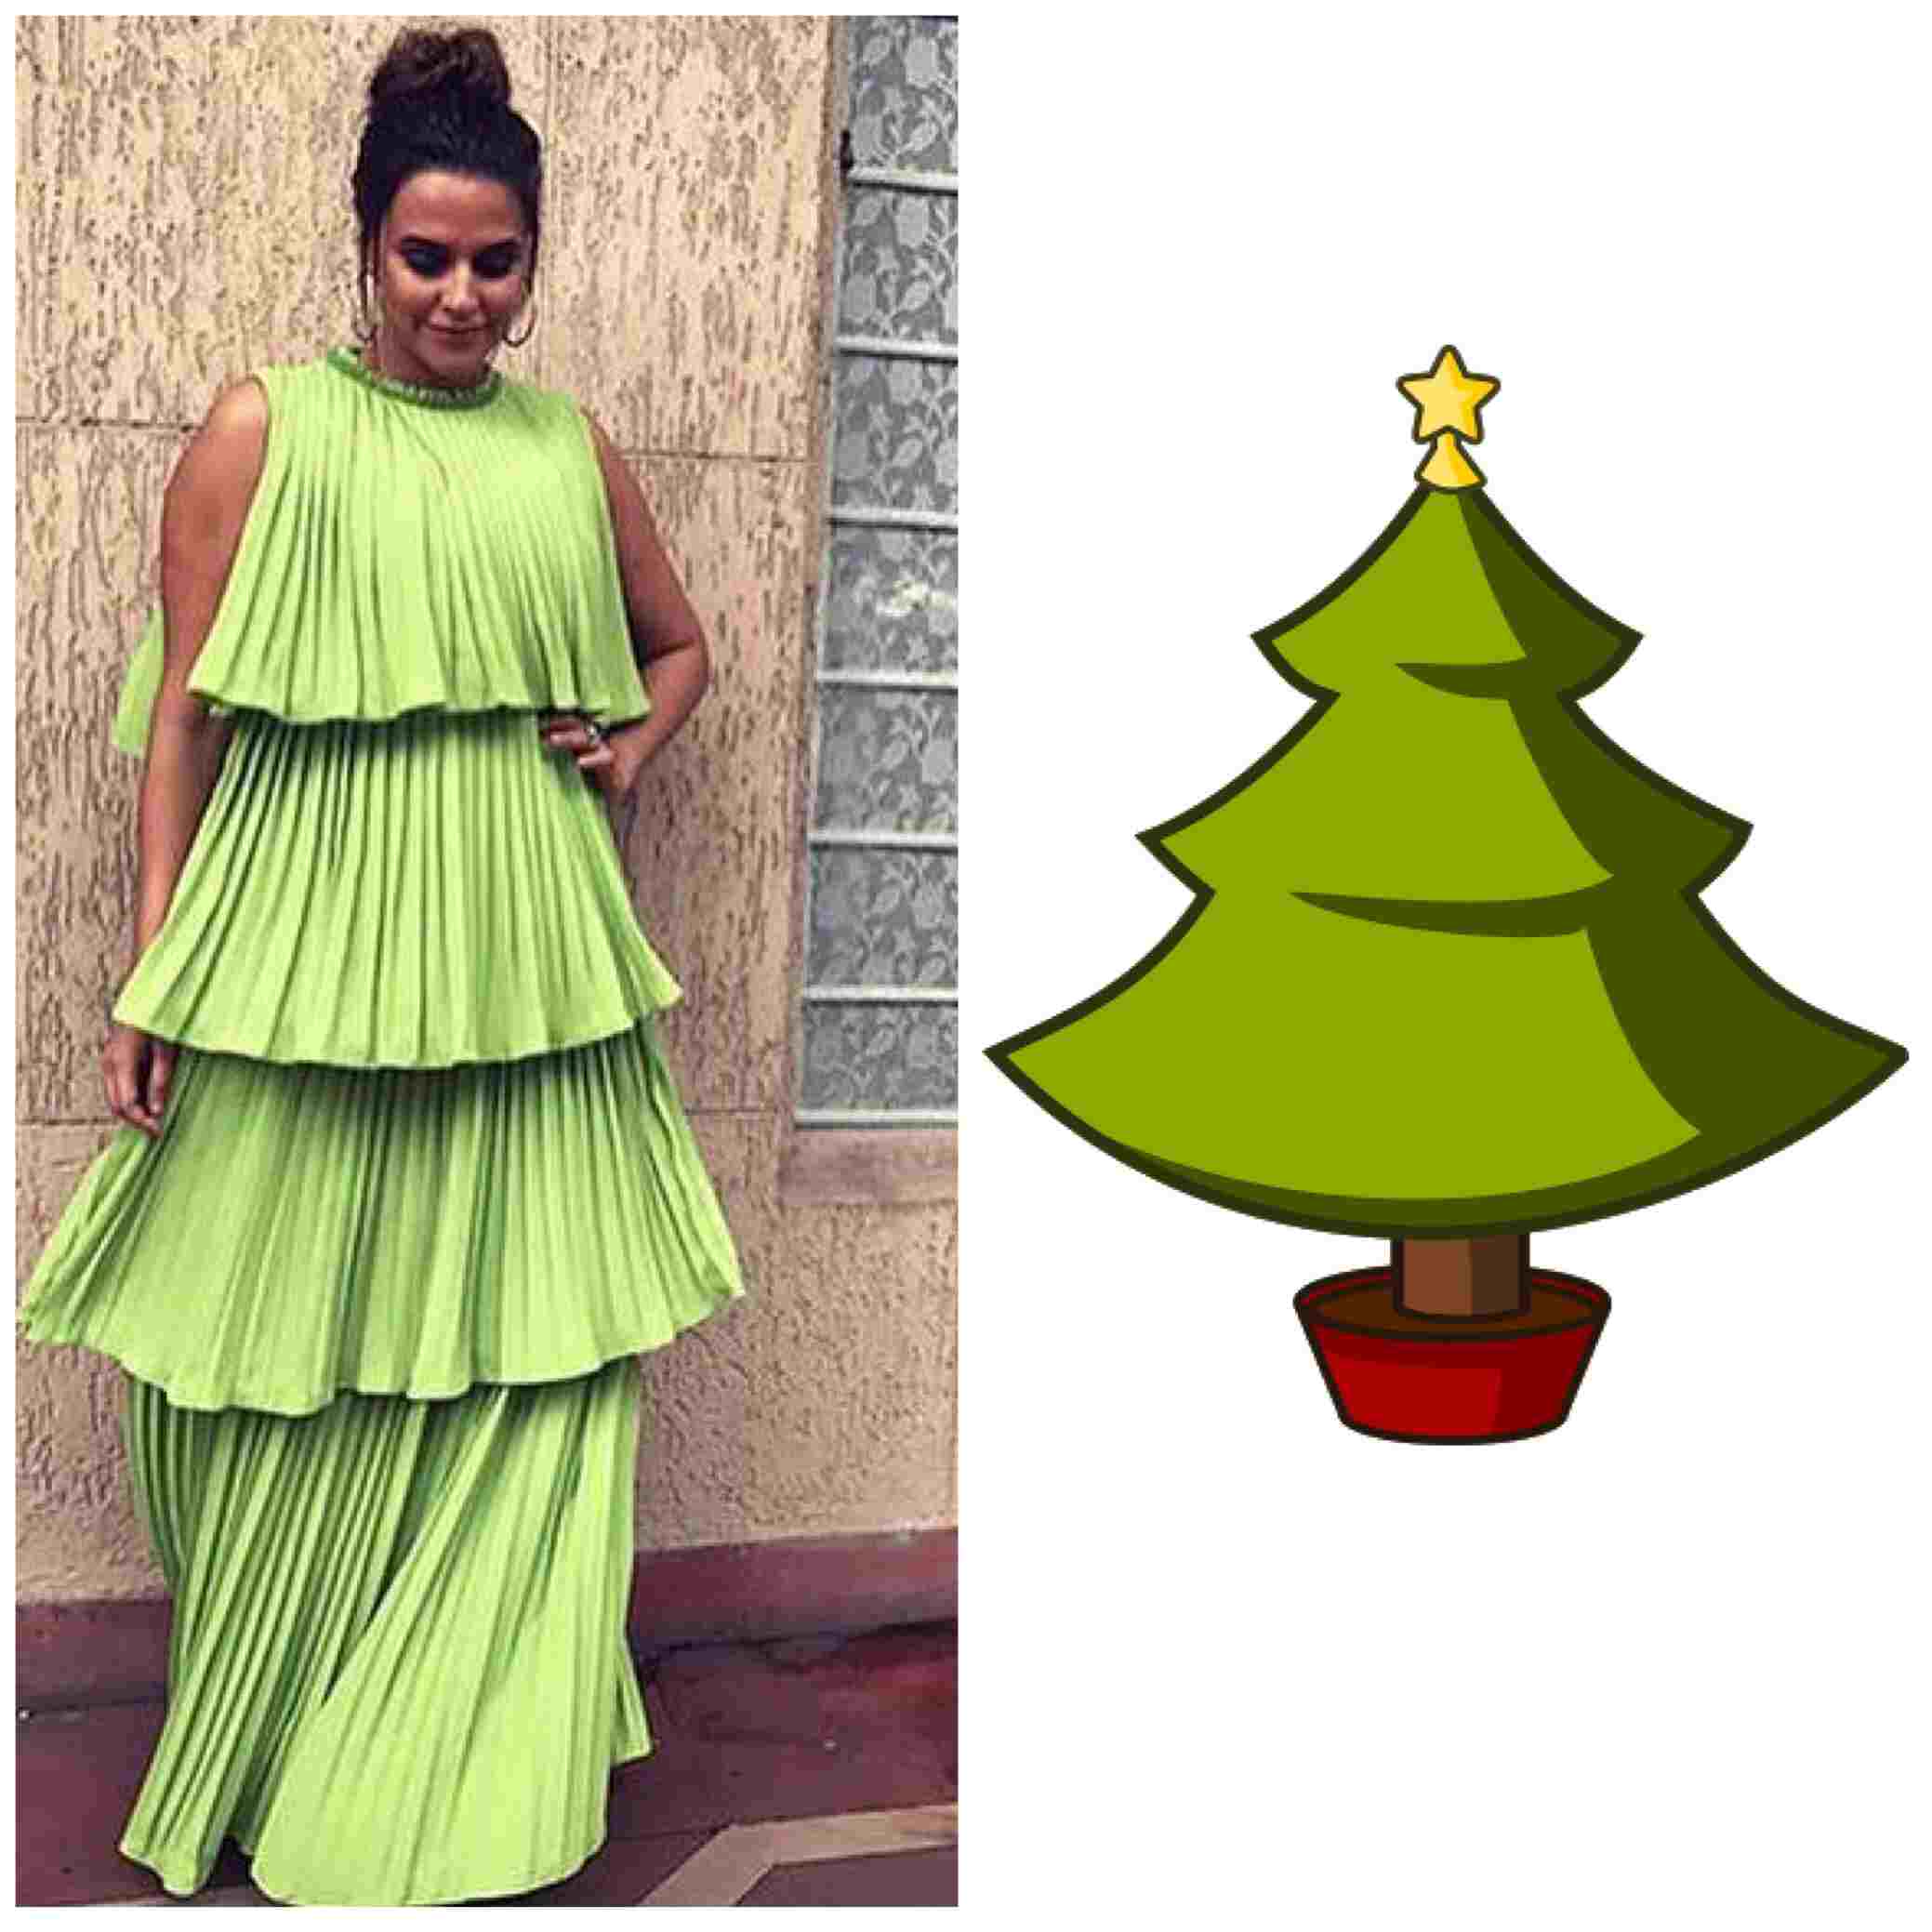 Neha Dhupia looks like an X-mass tree in her latest green outfit!